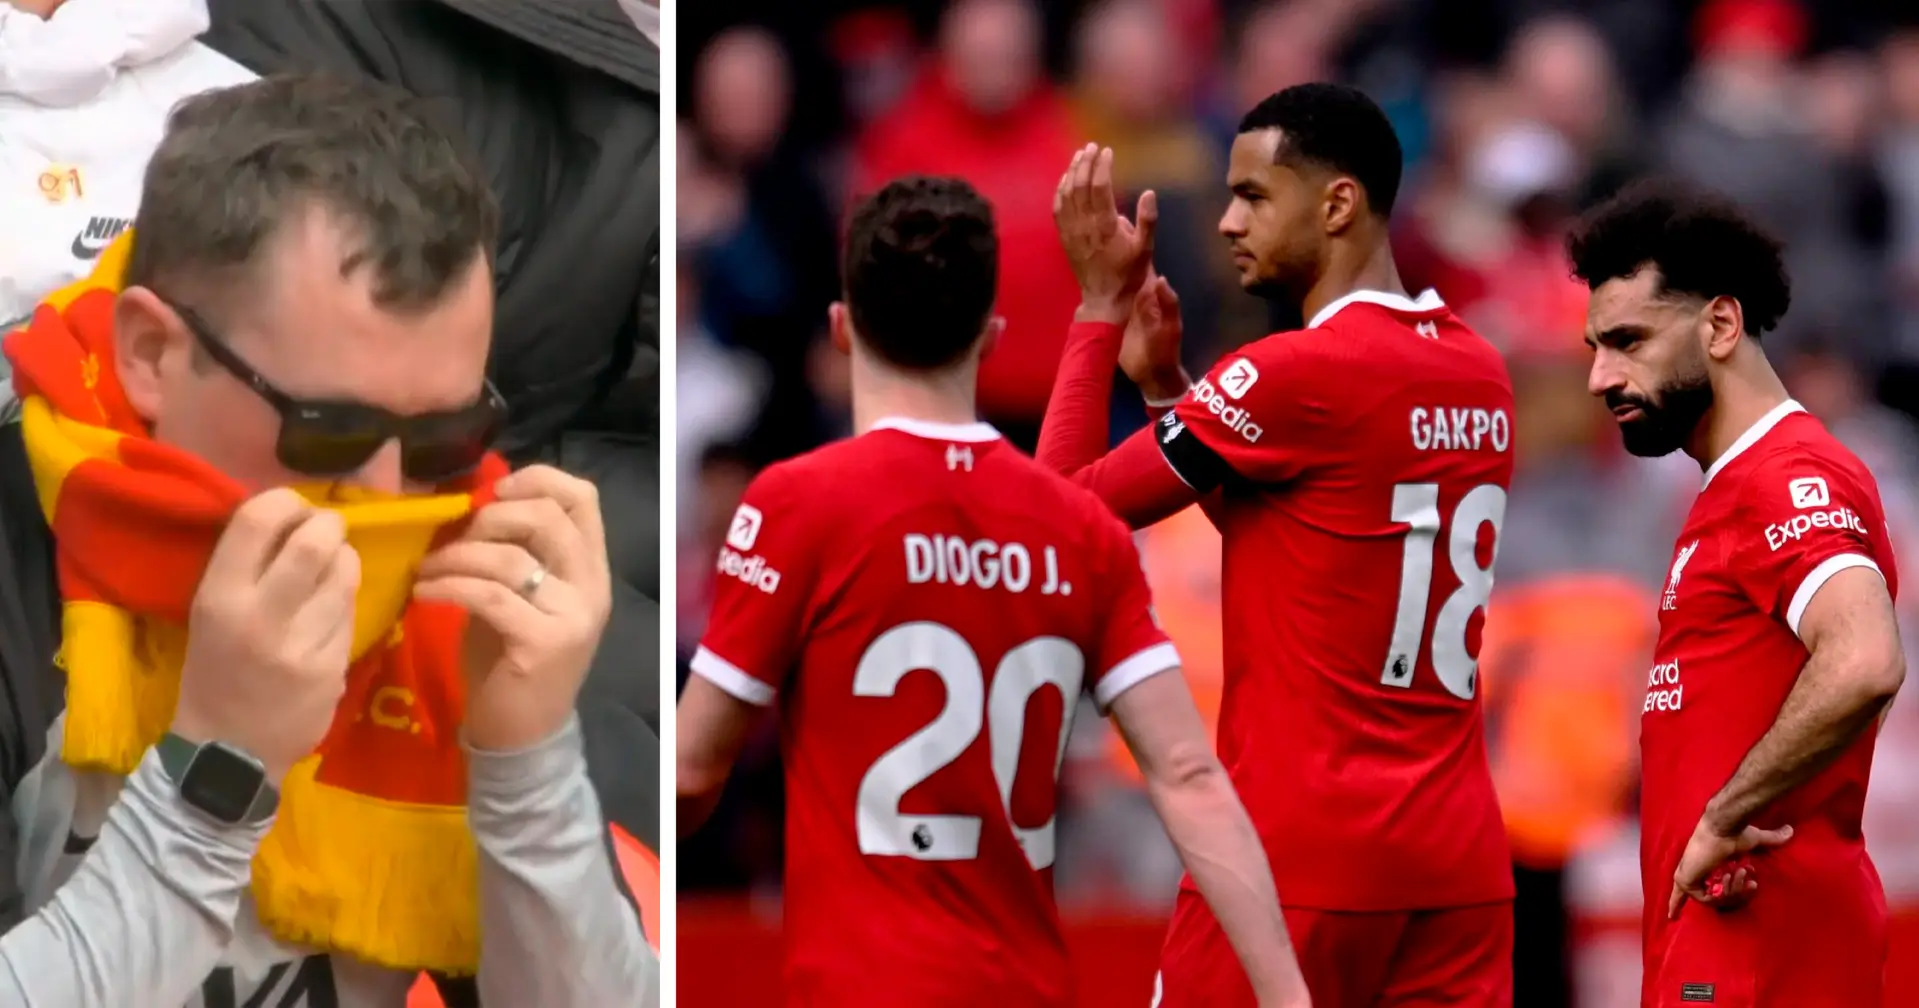 Spotted: Liverpool fan reacts to Crystal Palace result - we all feel this way